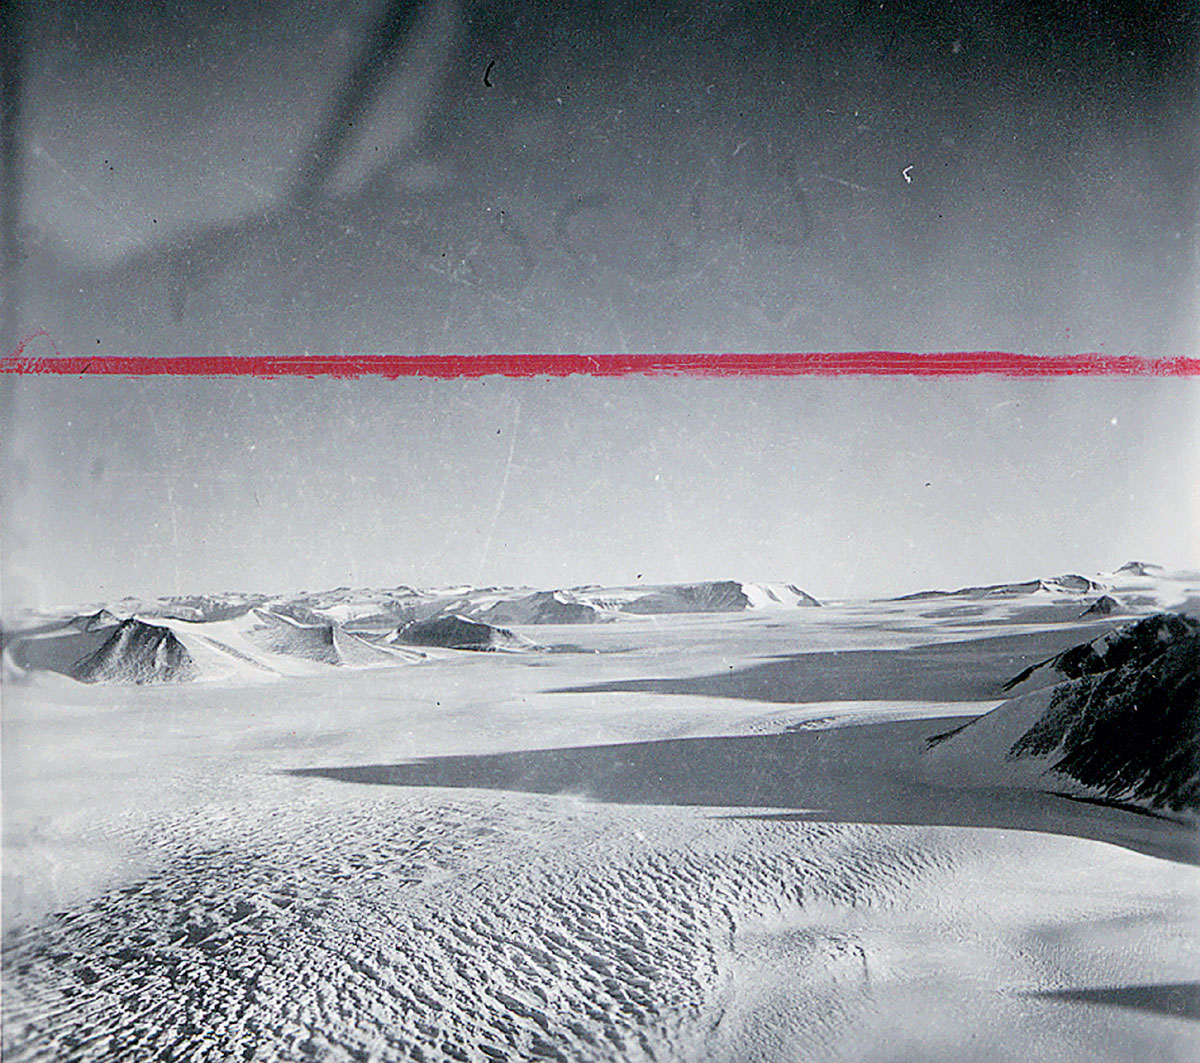 A photograph of an Antarctic landscape with red crop marks along the top.